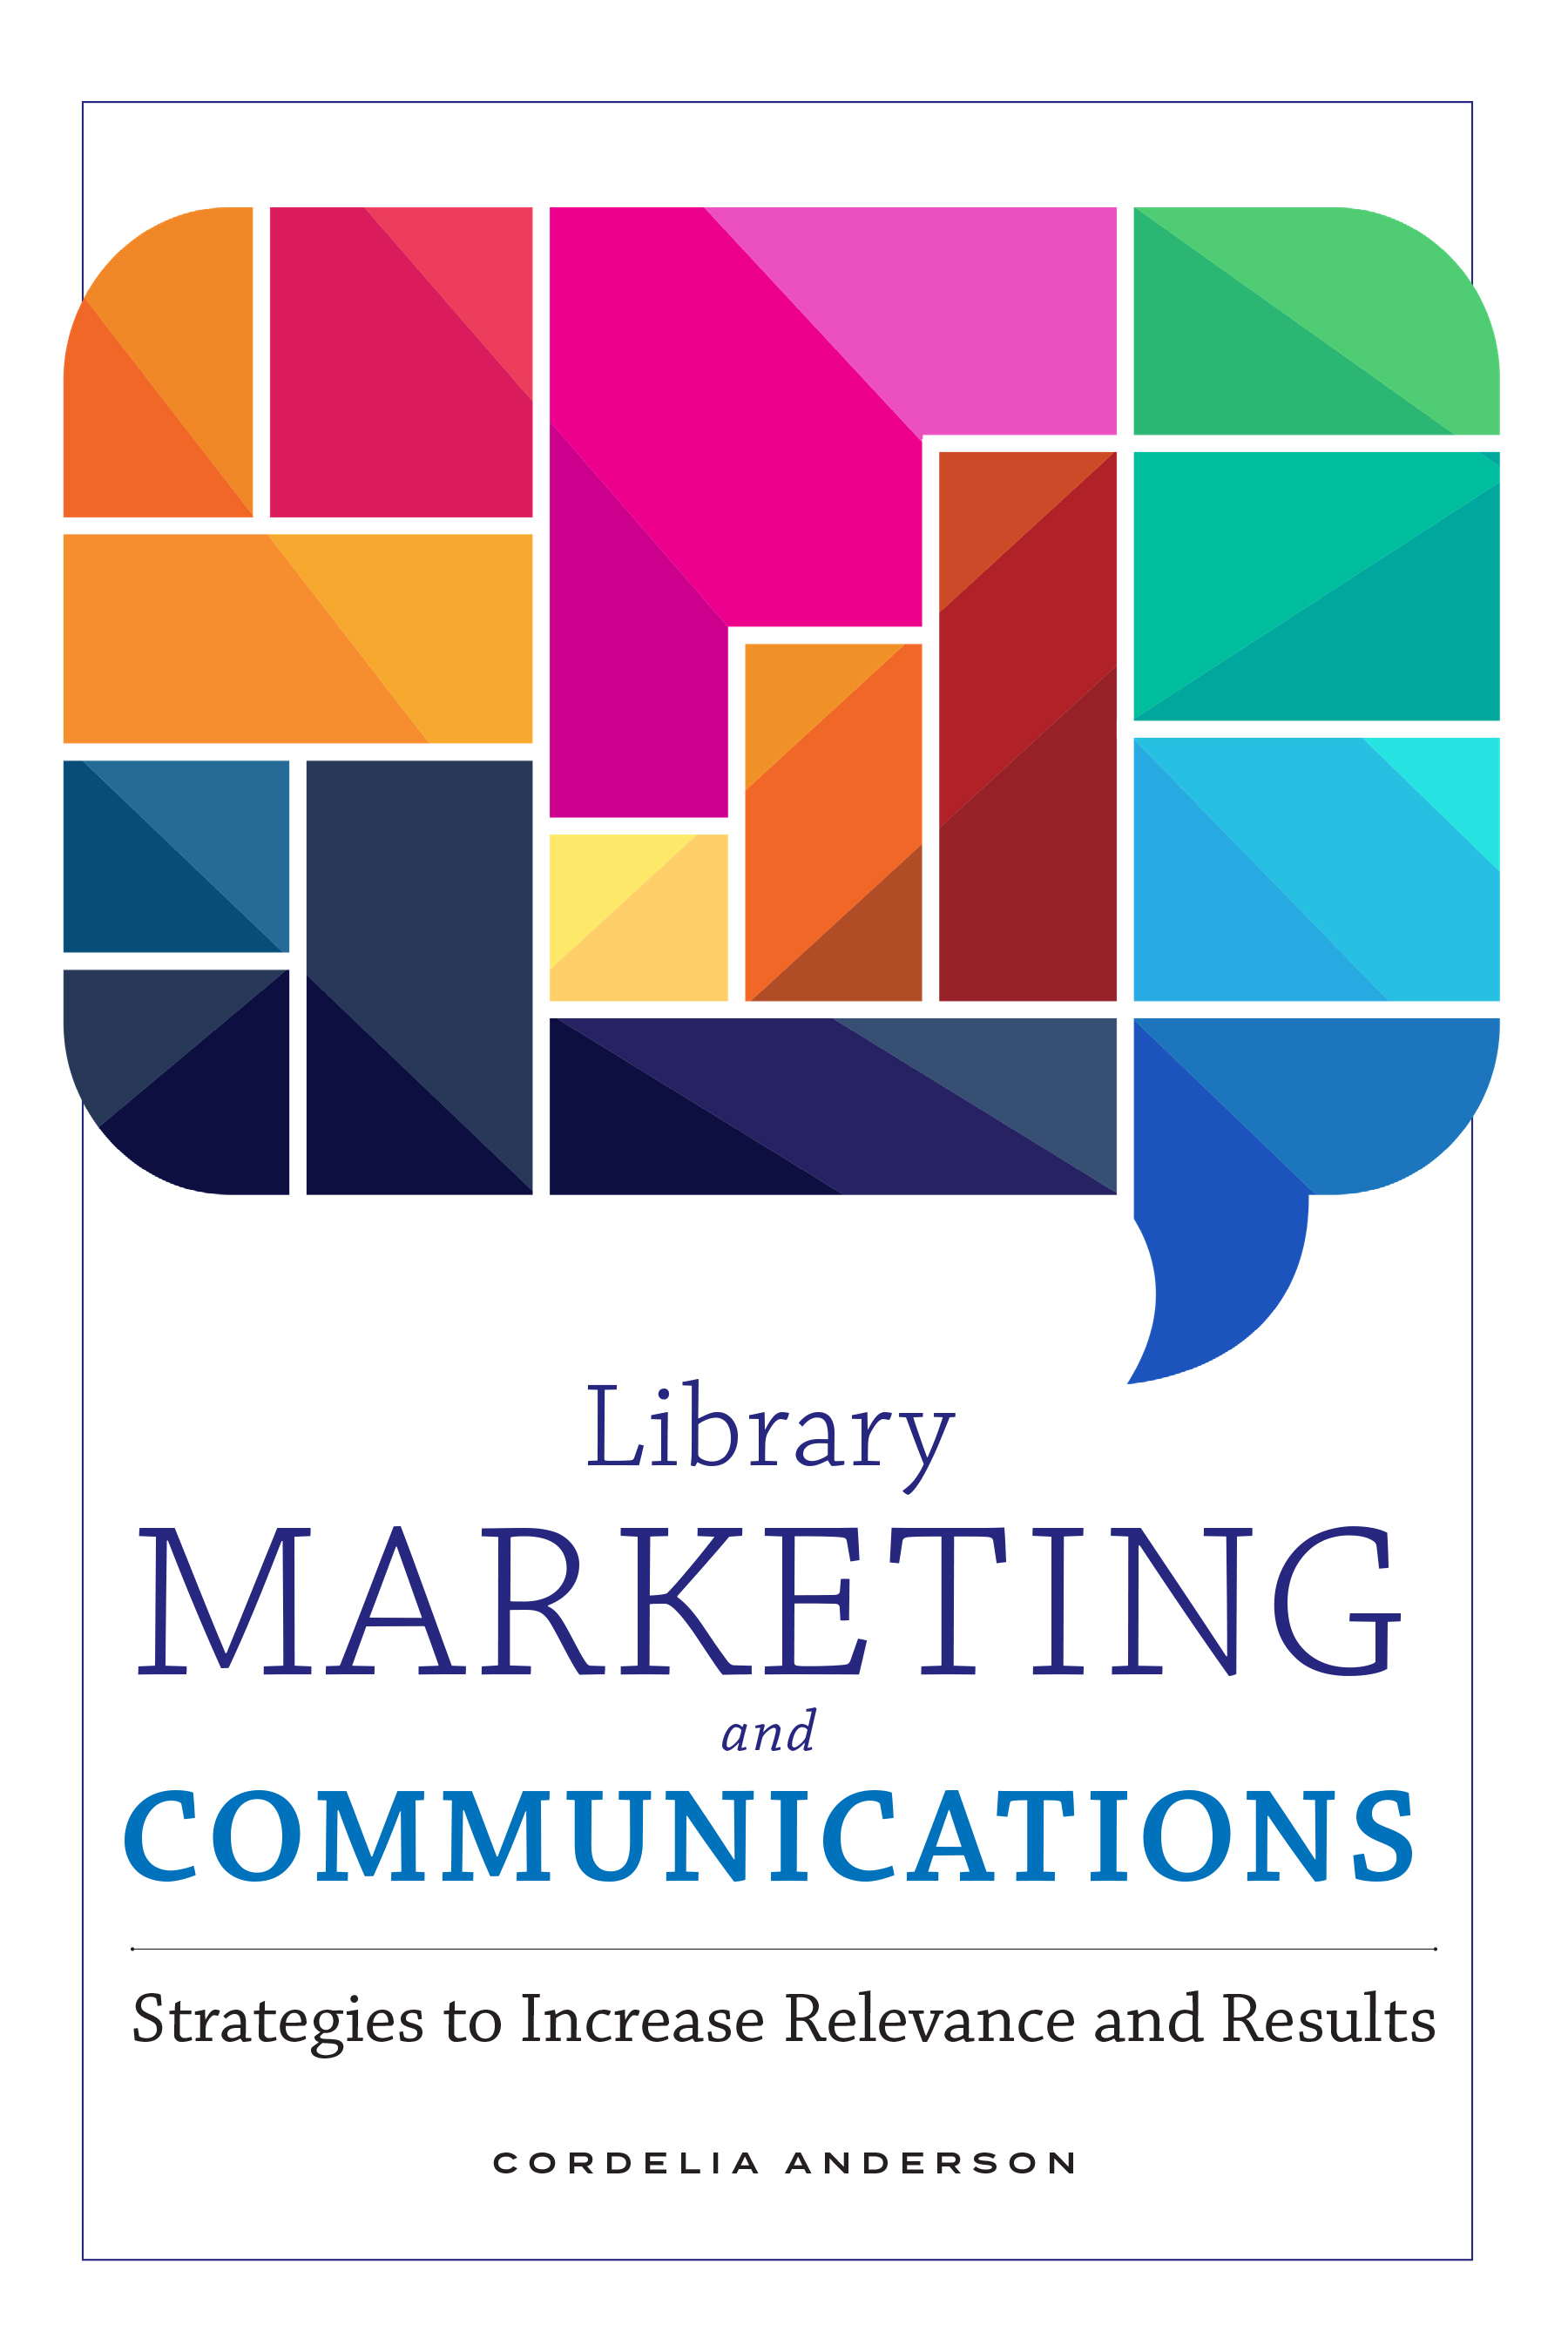 Library Marketing and Communications: Strategies to Increase Relevance and Results